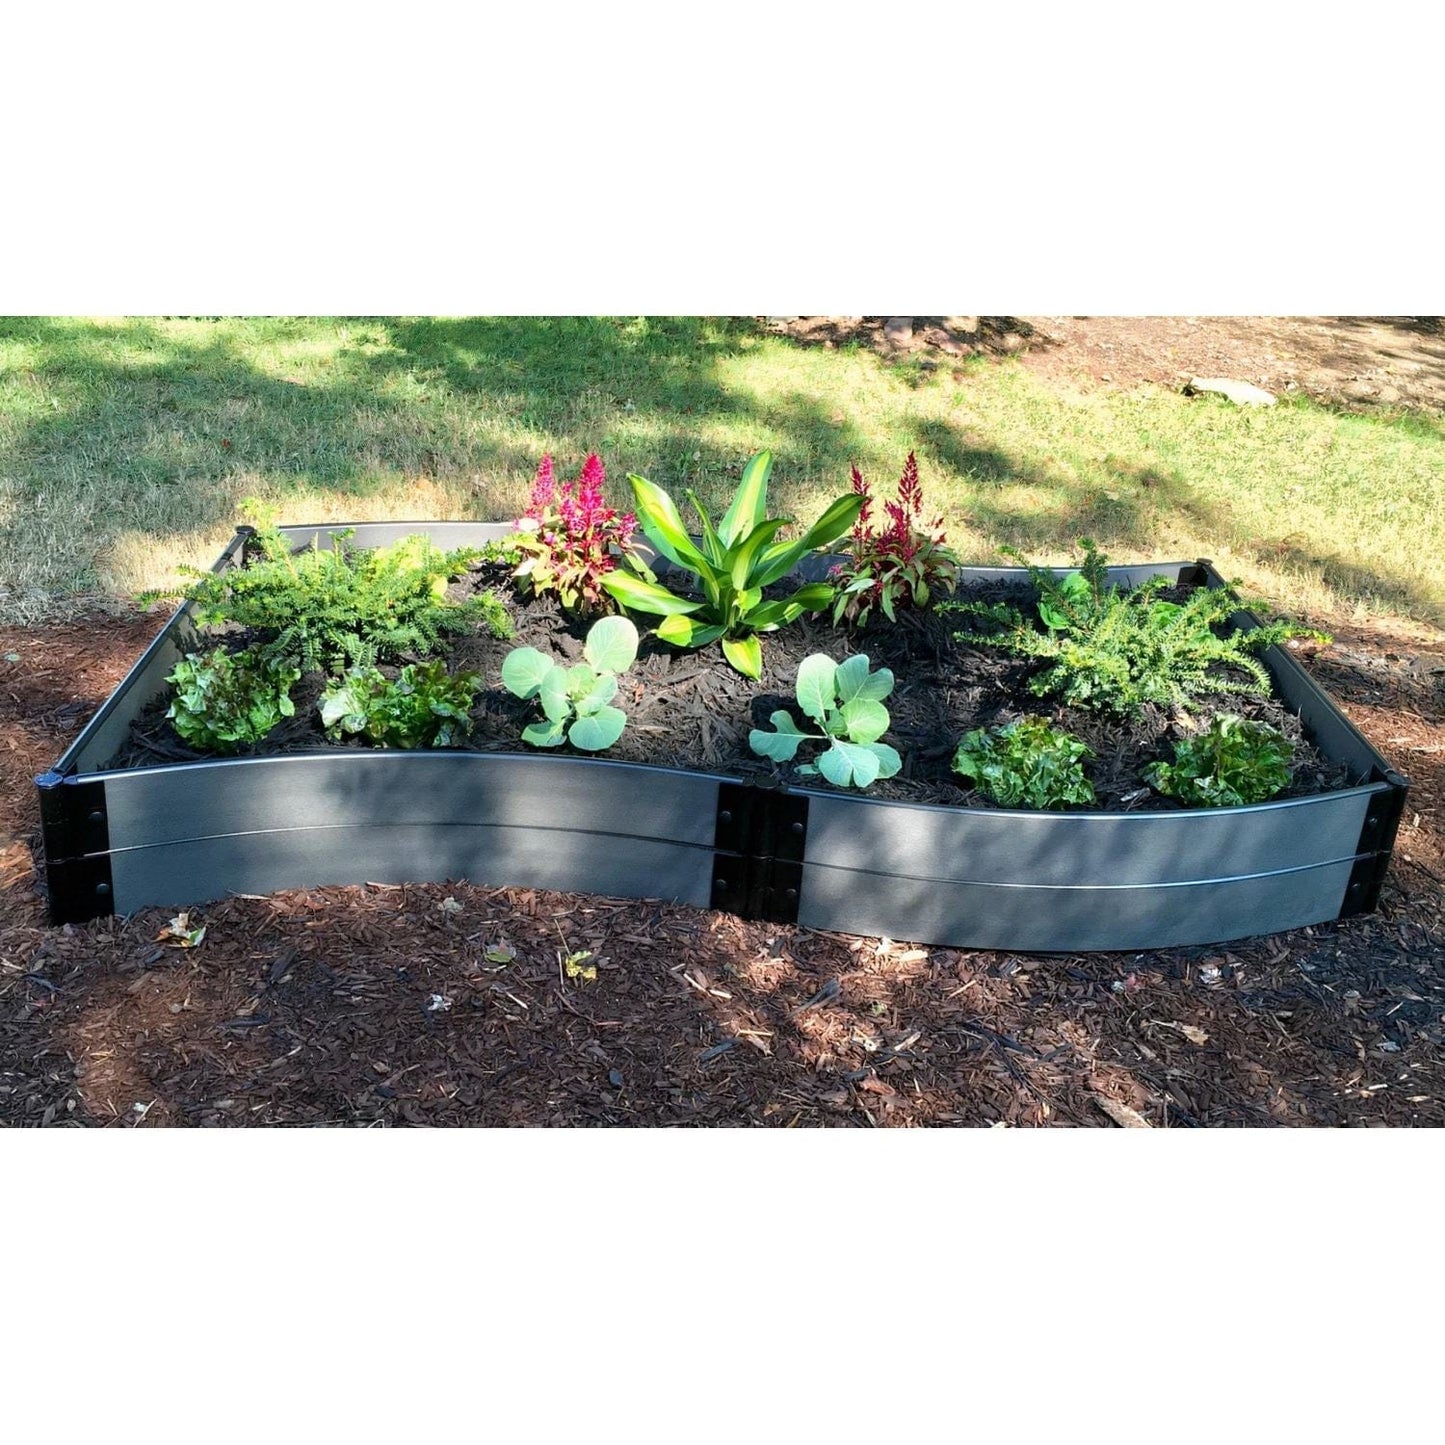 Frame It All Gardening Accessories Frame It All | Tool-Free Wavy Navy Raised Garden Bed 4' X 8' X 16.5" - Uptown Brown - 1" Profile 800003073